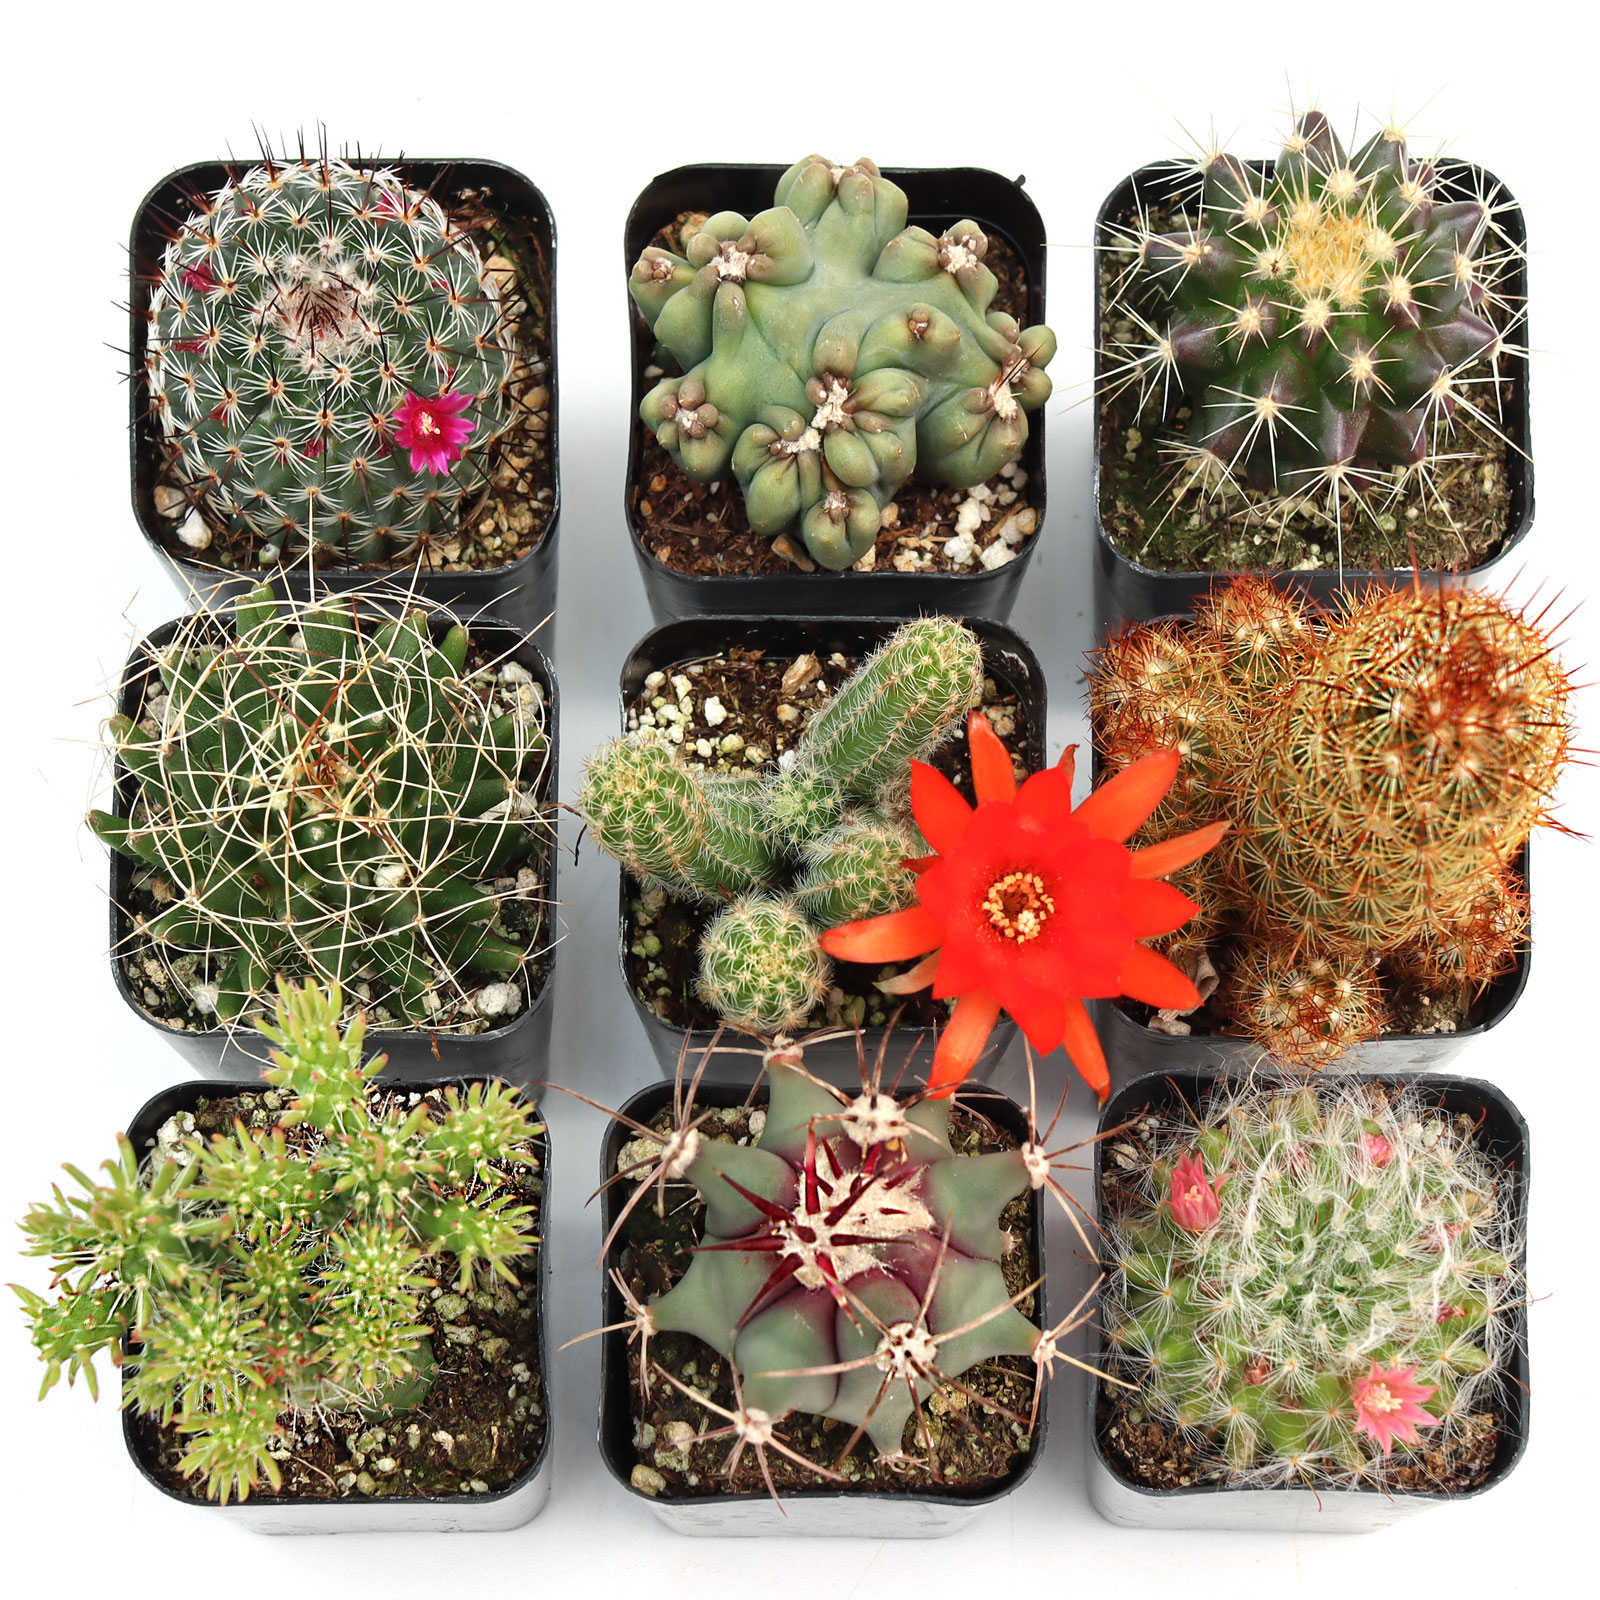 Can these be planted in pots and placed outside in a full sun rock garden?